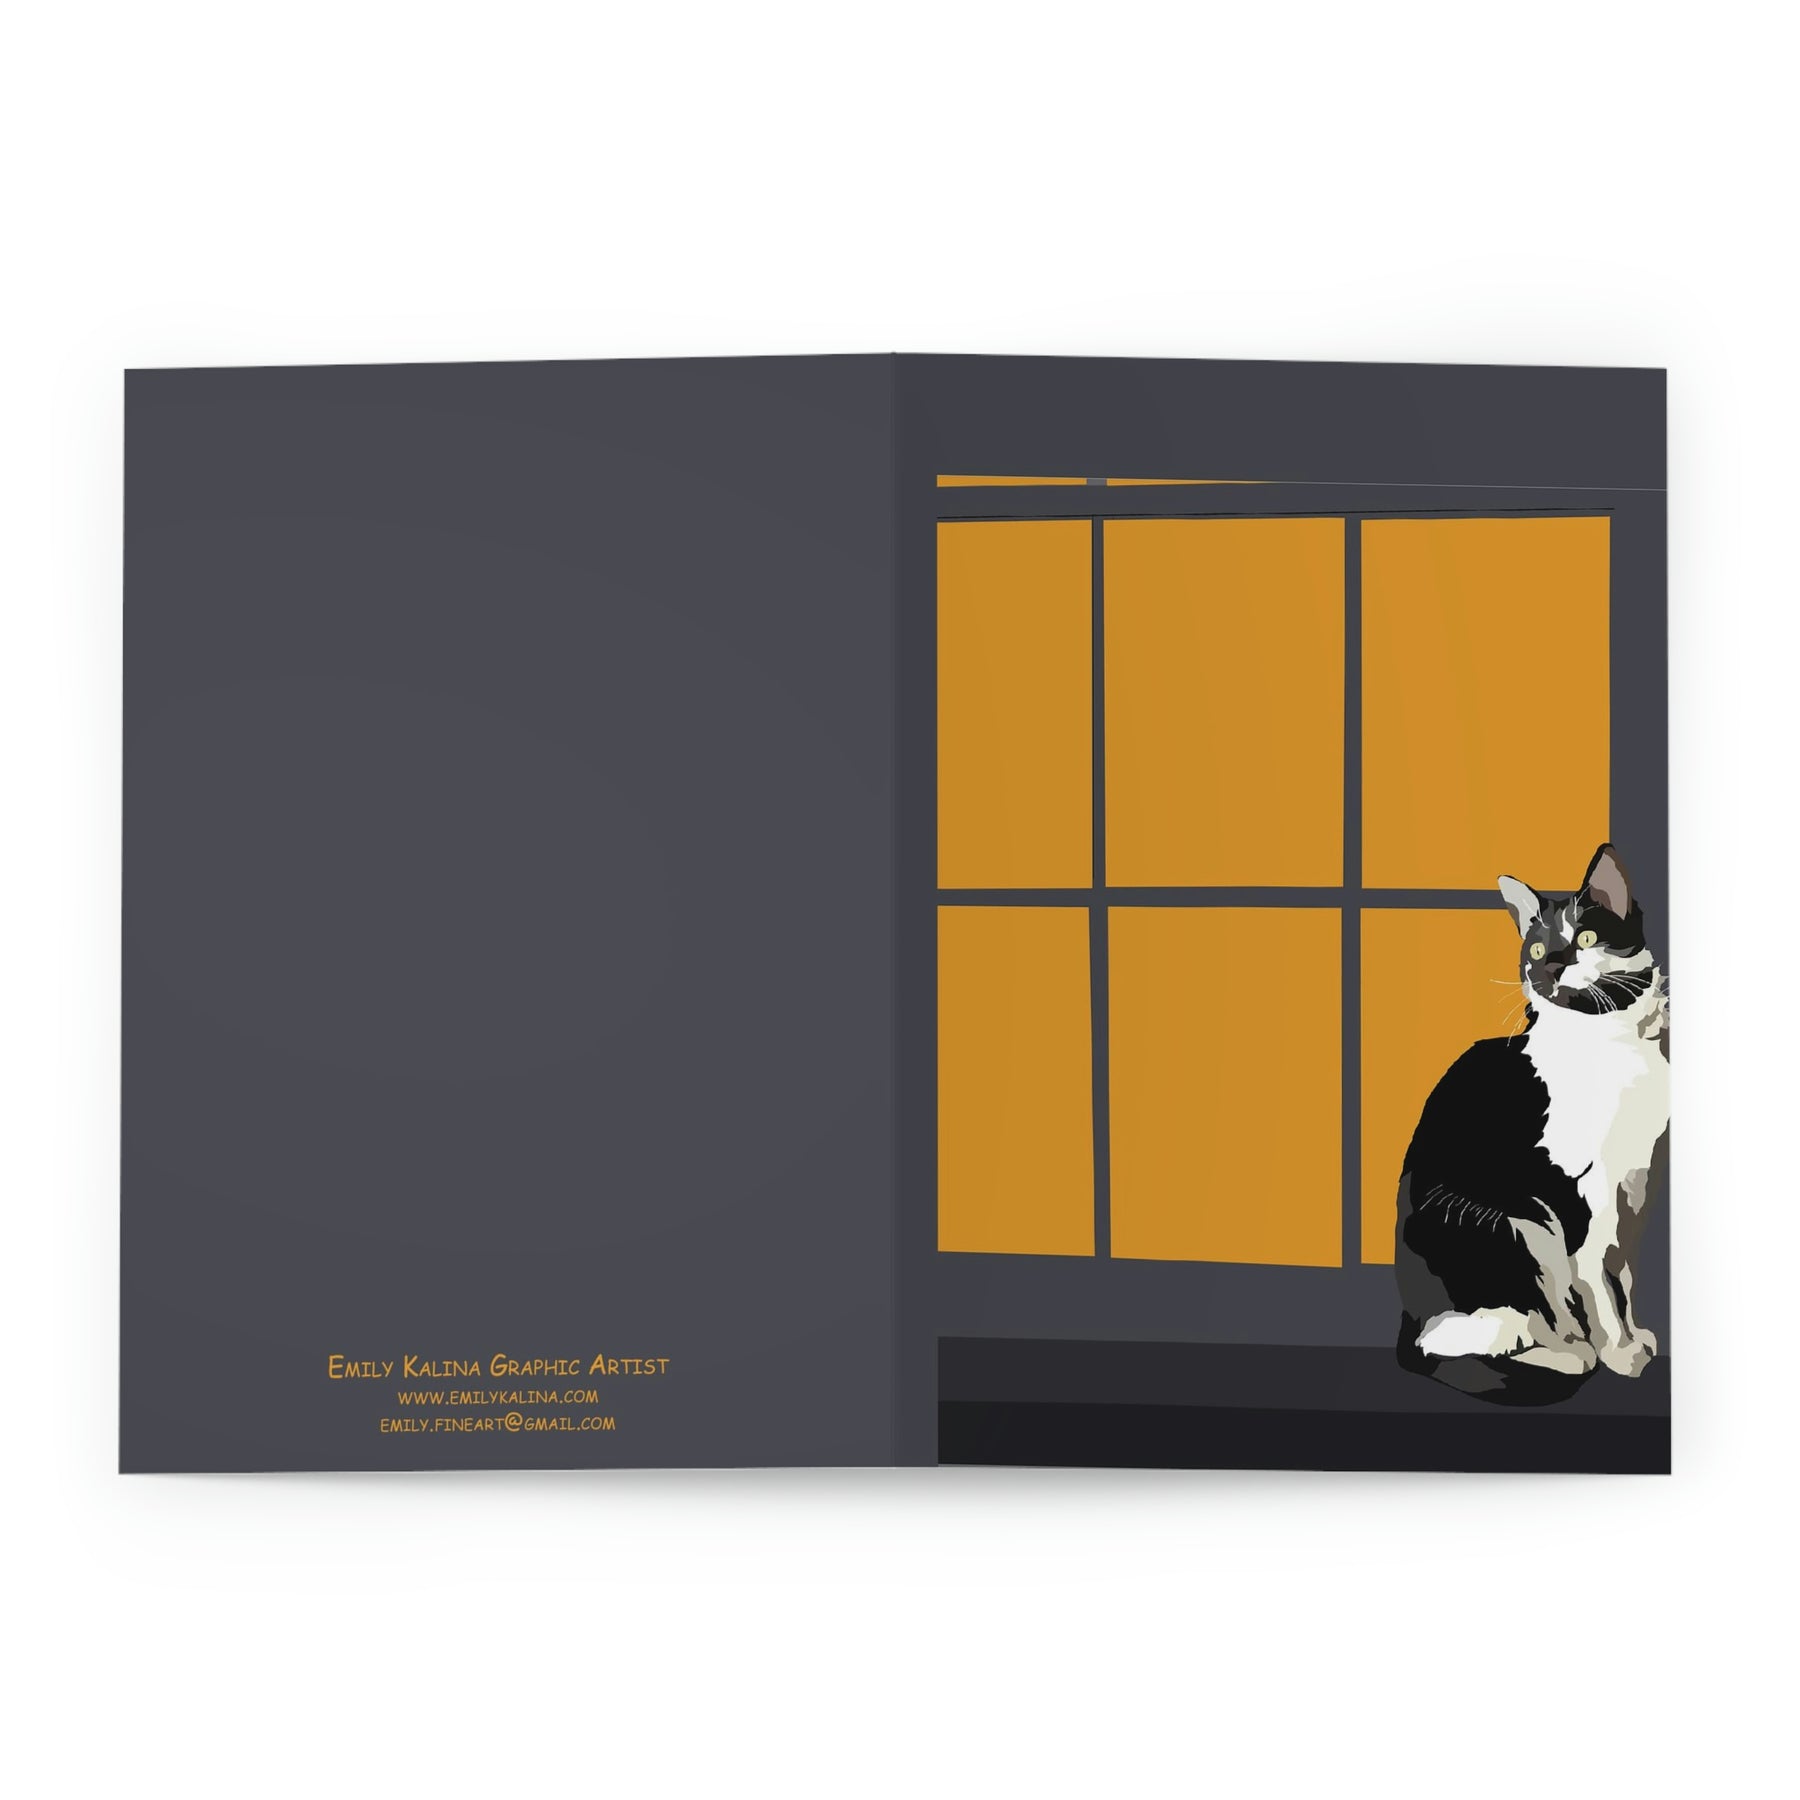 Nicte - Greeting Cards (5 pack)